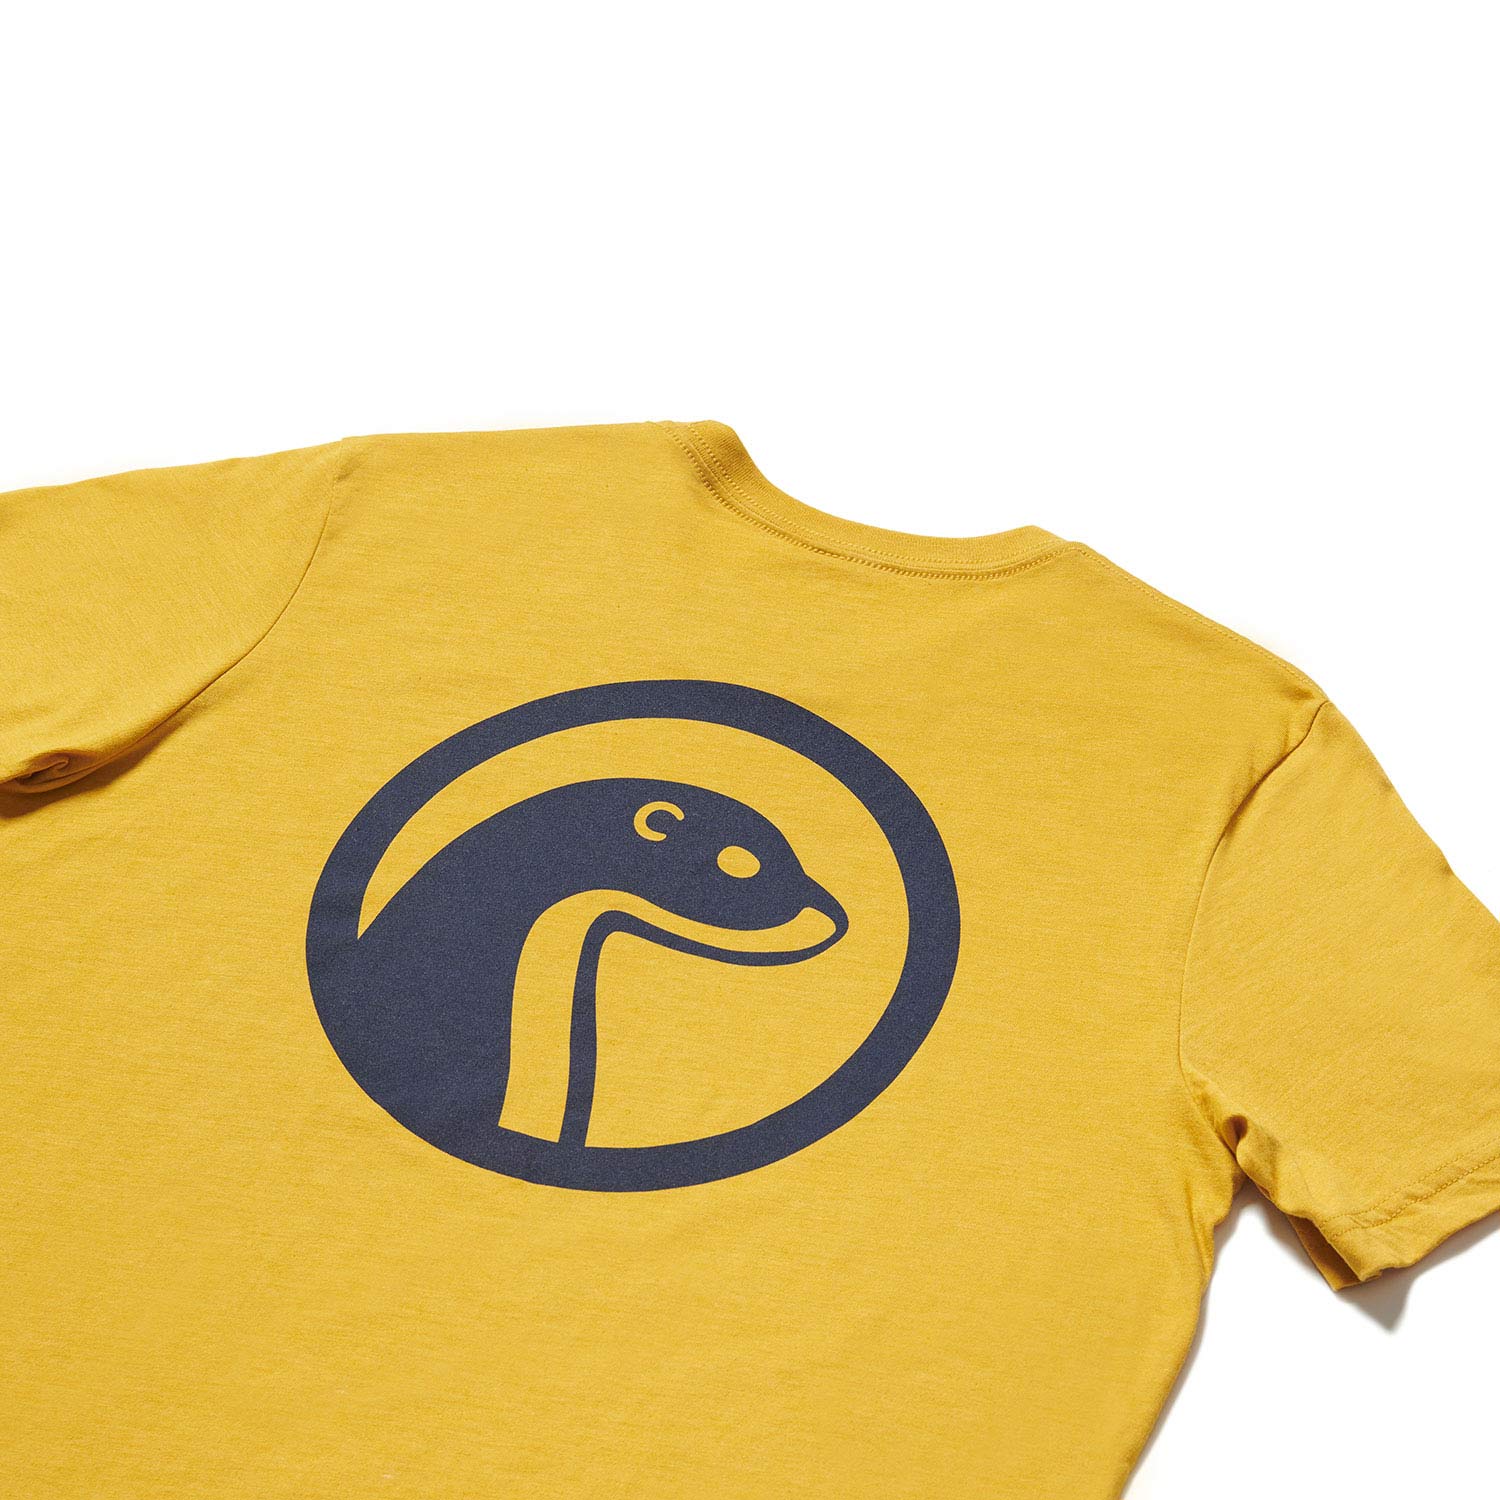 Otter Wax Made In The USA Logo T-Shirt In Mustard Yellow Cotton Fabric And Navy Blue Screenprint